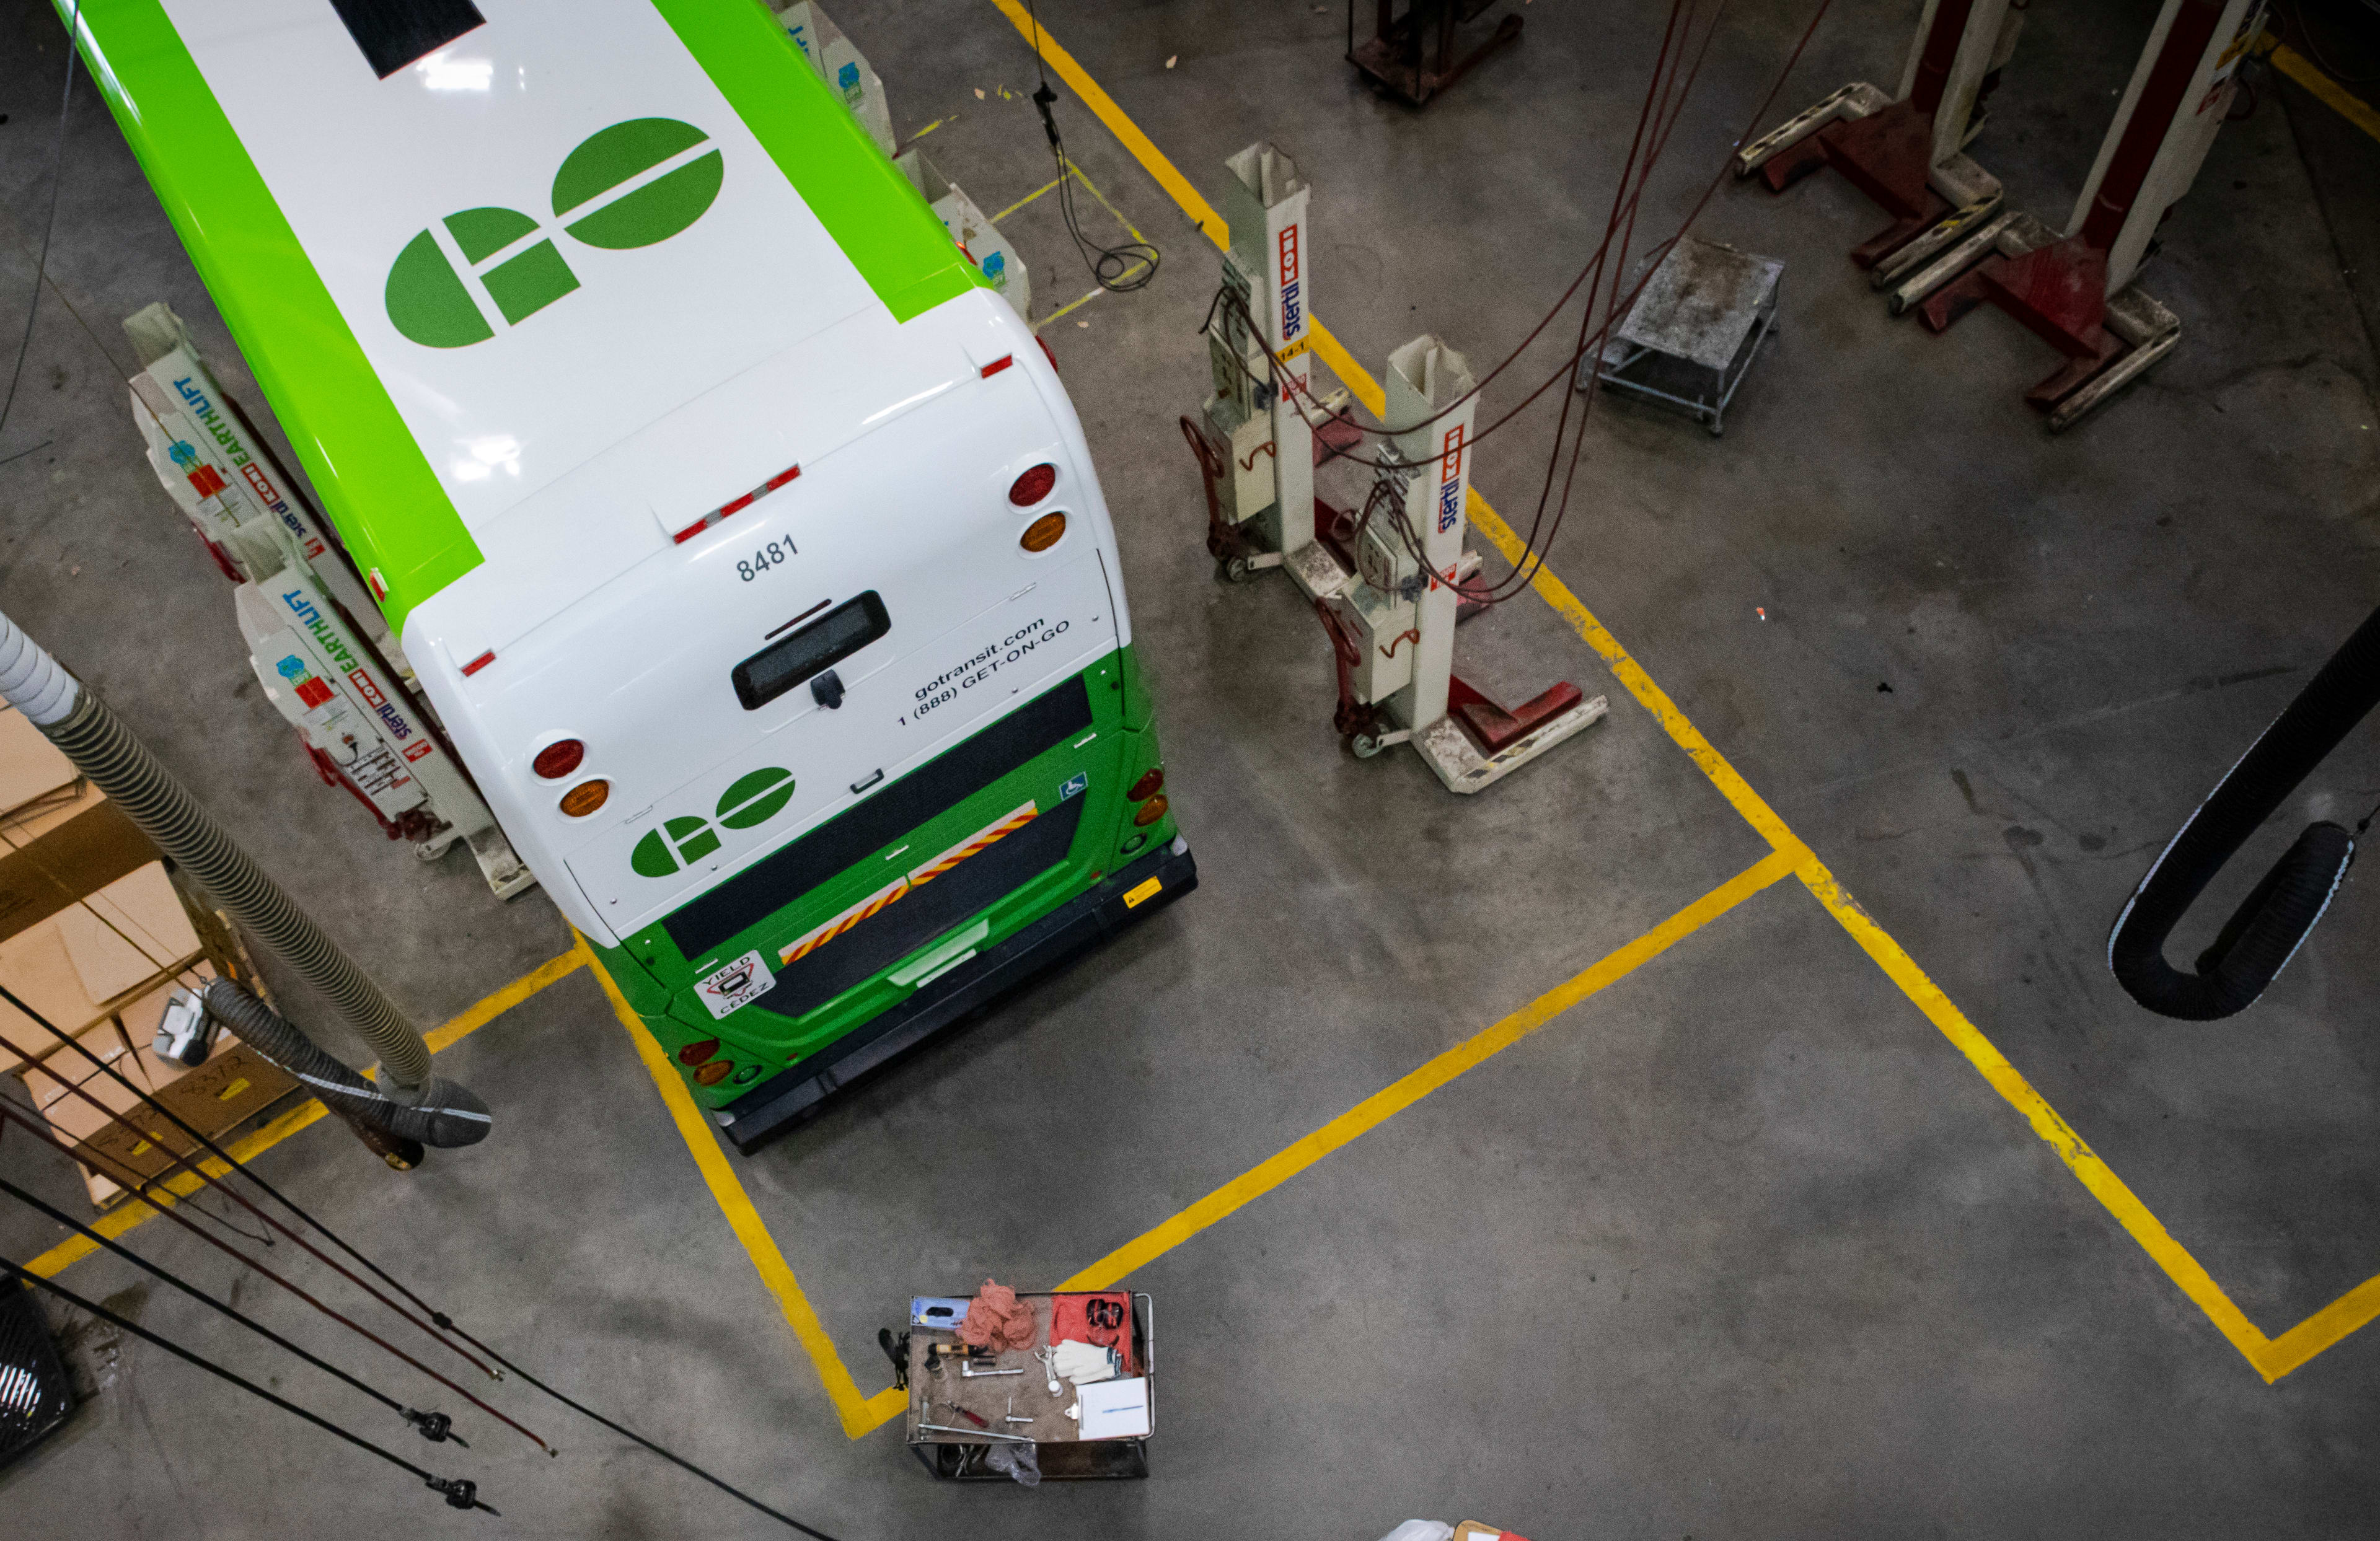 A look down from above, at a worker repairing a bus.